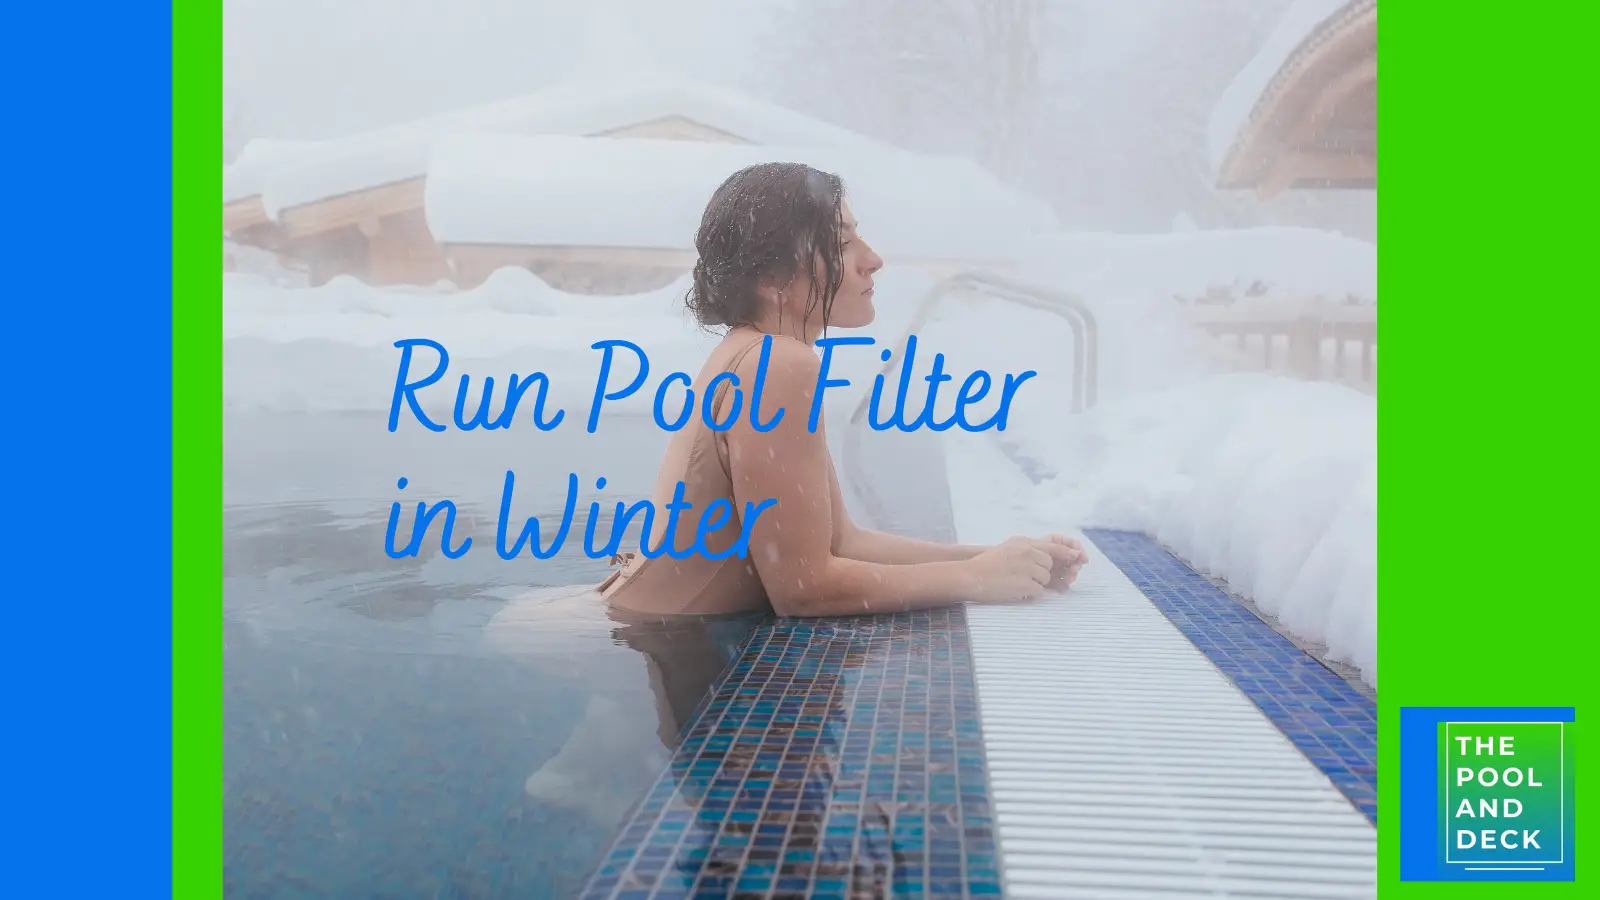 Why Run Pool Filter in Winter? And Other Important Questions Answered!